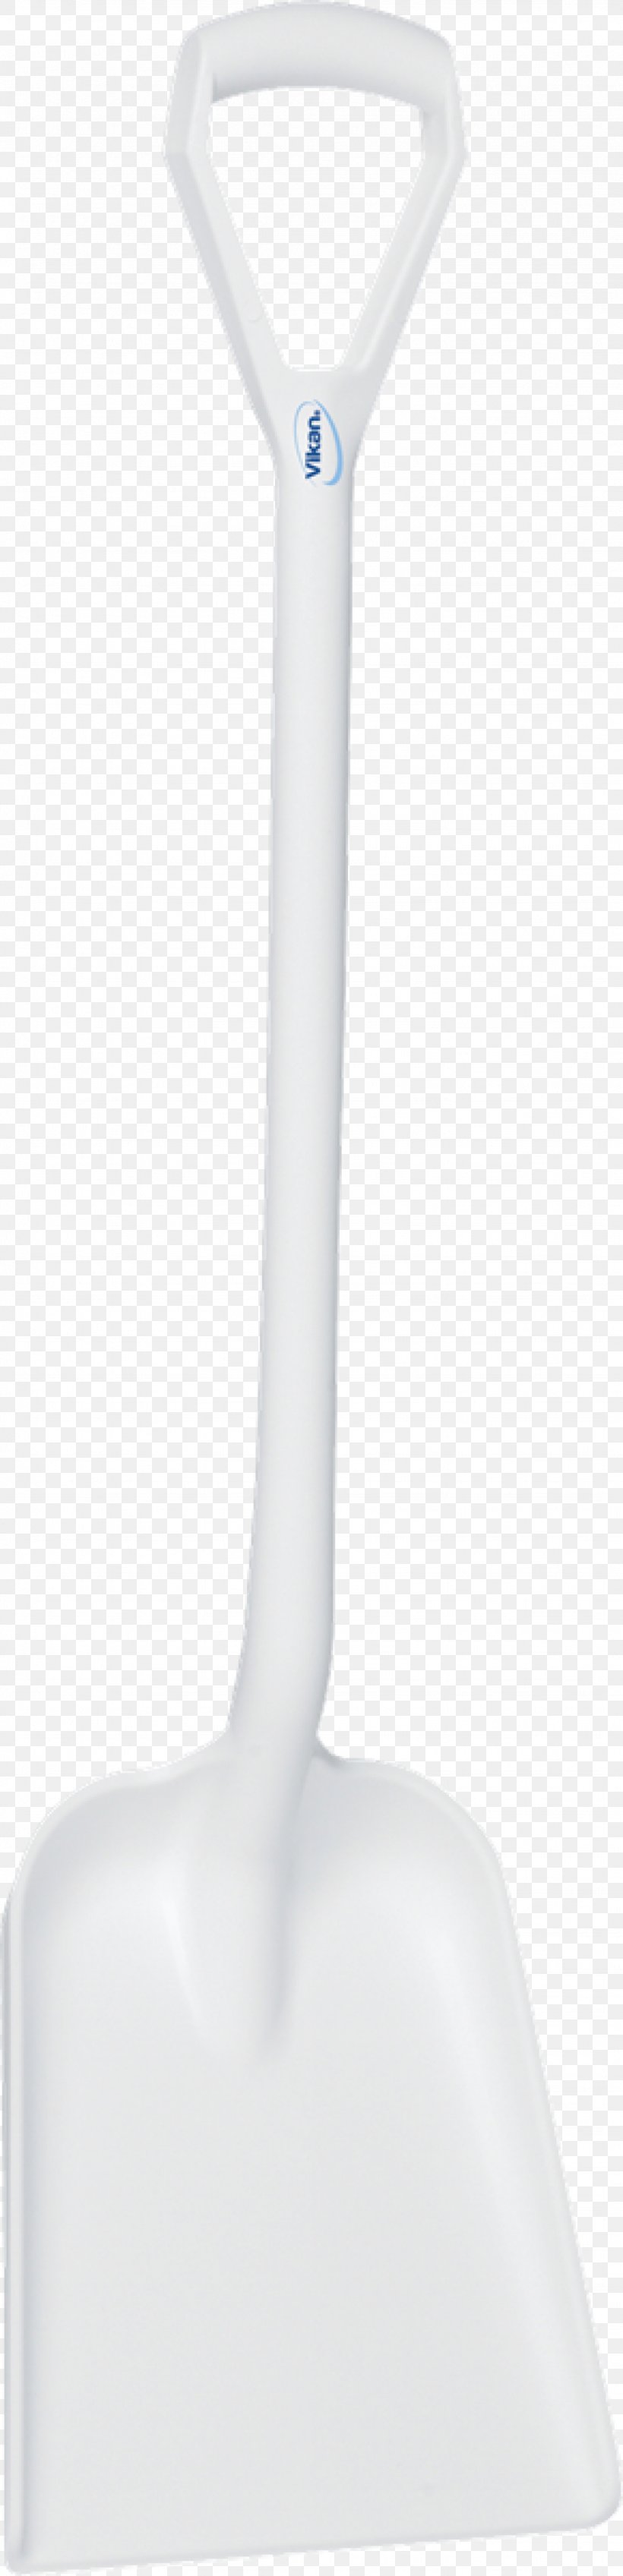 Product Design Angle Plastic, PNG, 1024x4238px, Plastic, Computer Hardware, Hardware, White Download Free